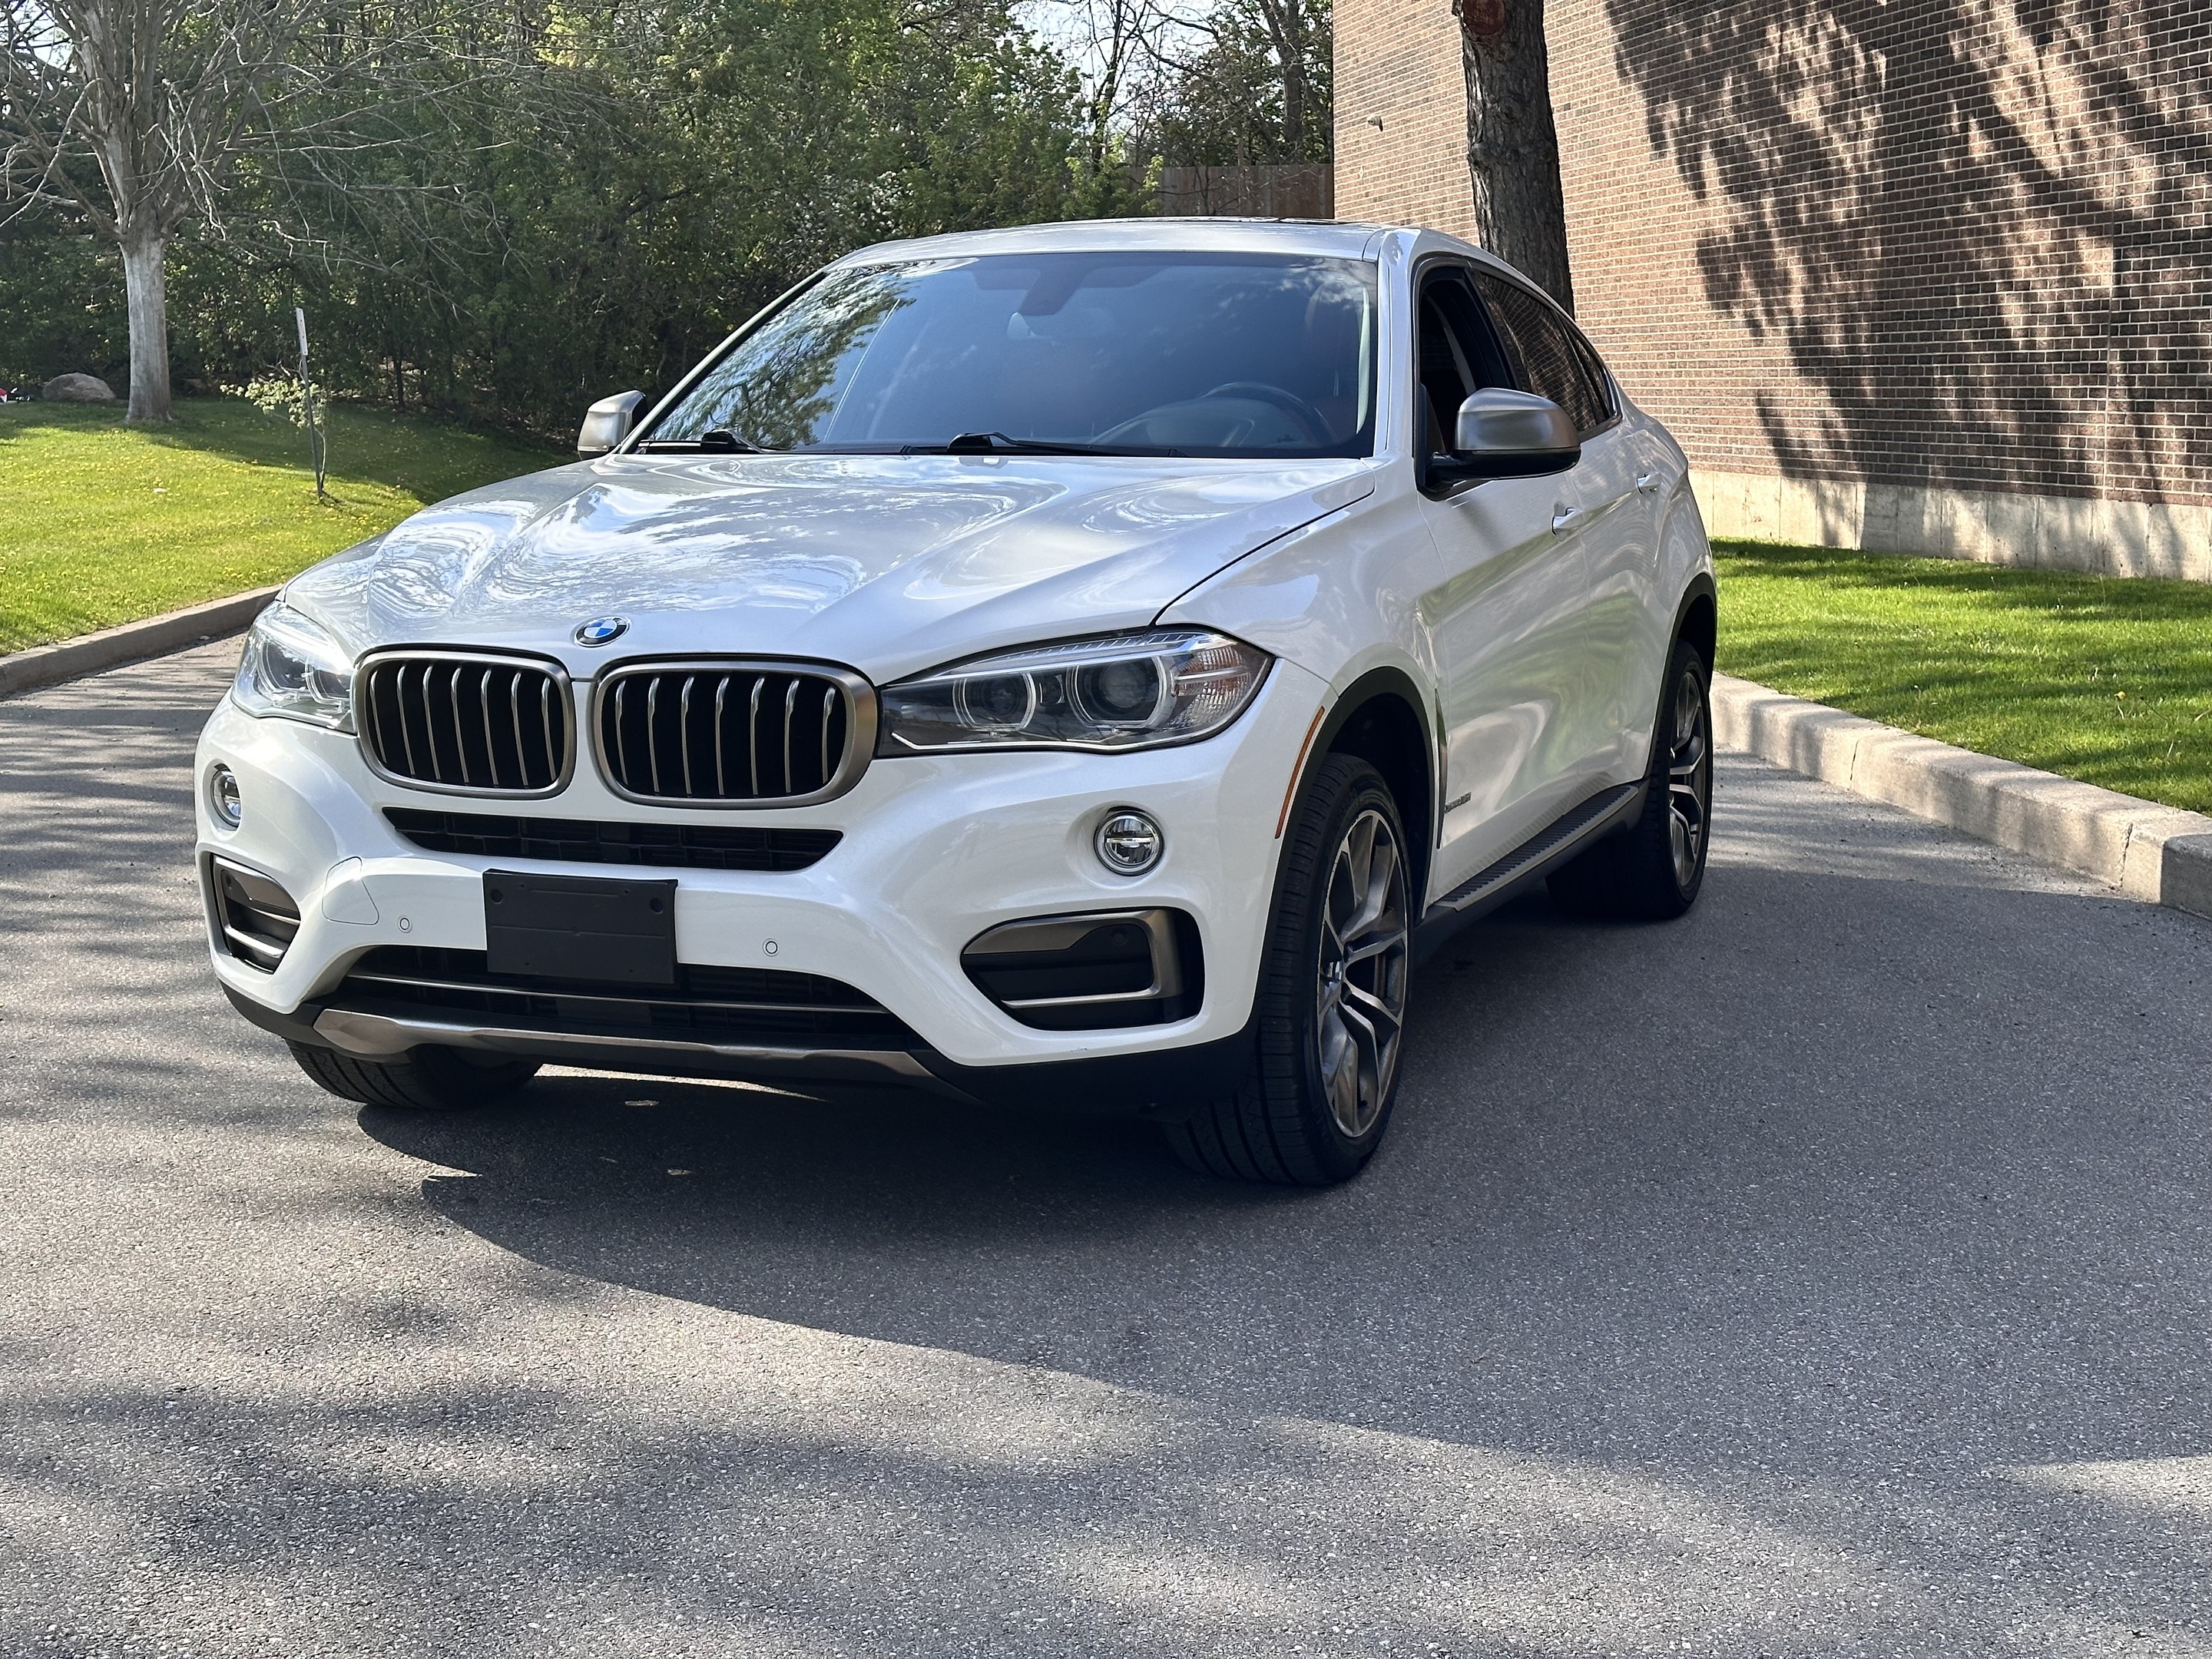 2016 BMW X6 AWD 4dr xDrive35 Heads up display/Accident free